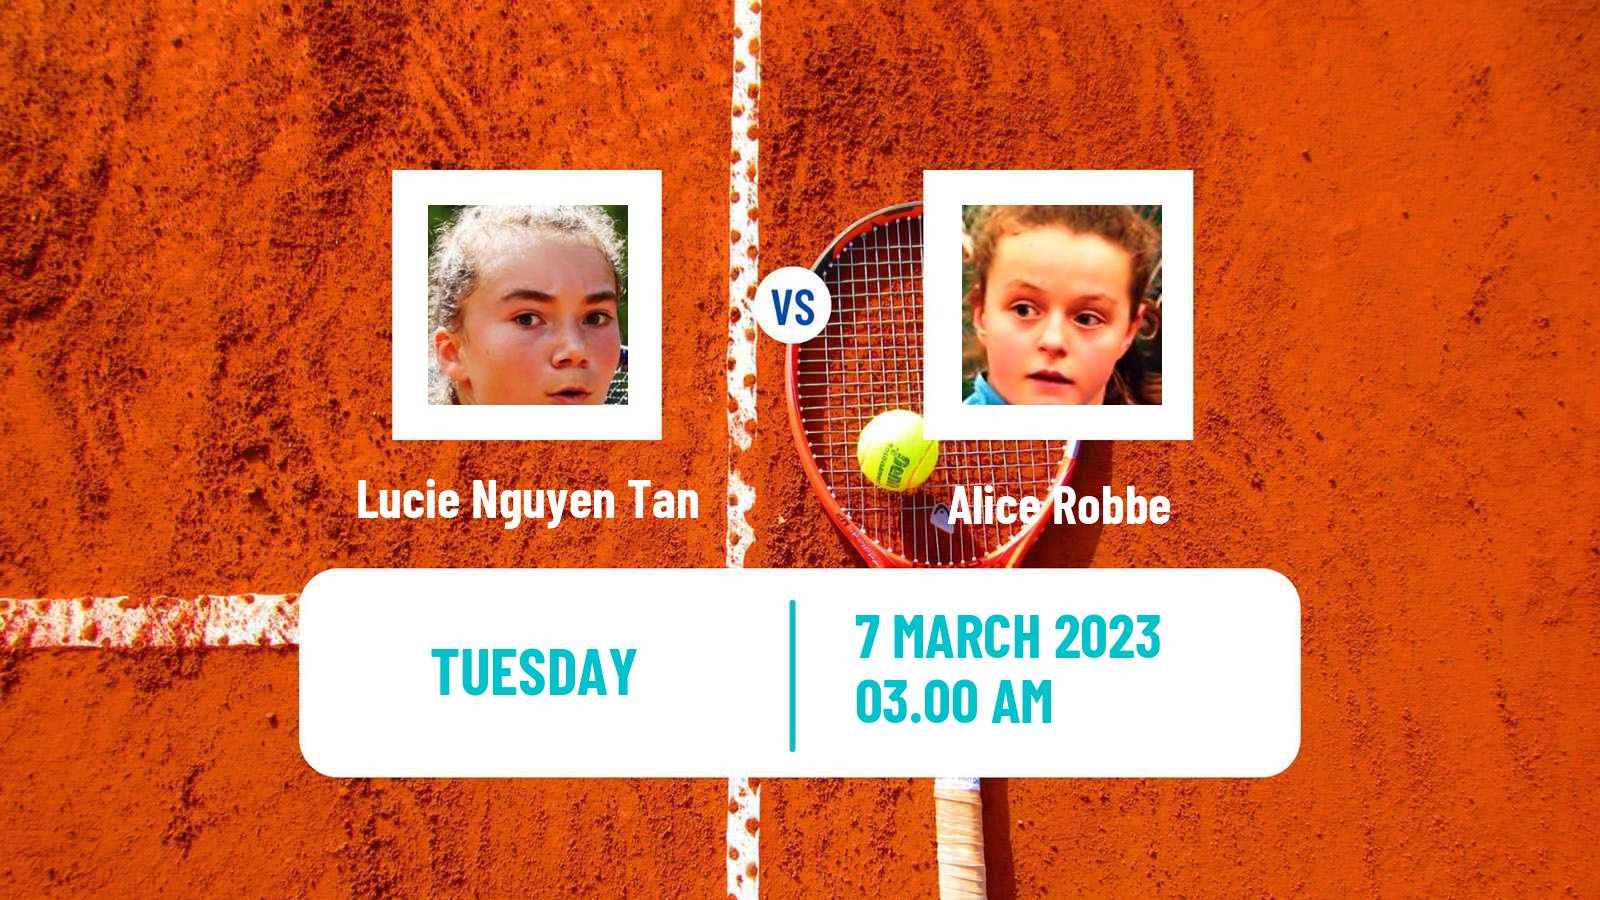 Tennis ITF Tournaments Lucie Nguyen Tan - Alice Robbe